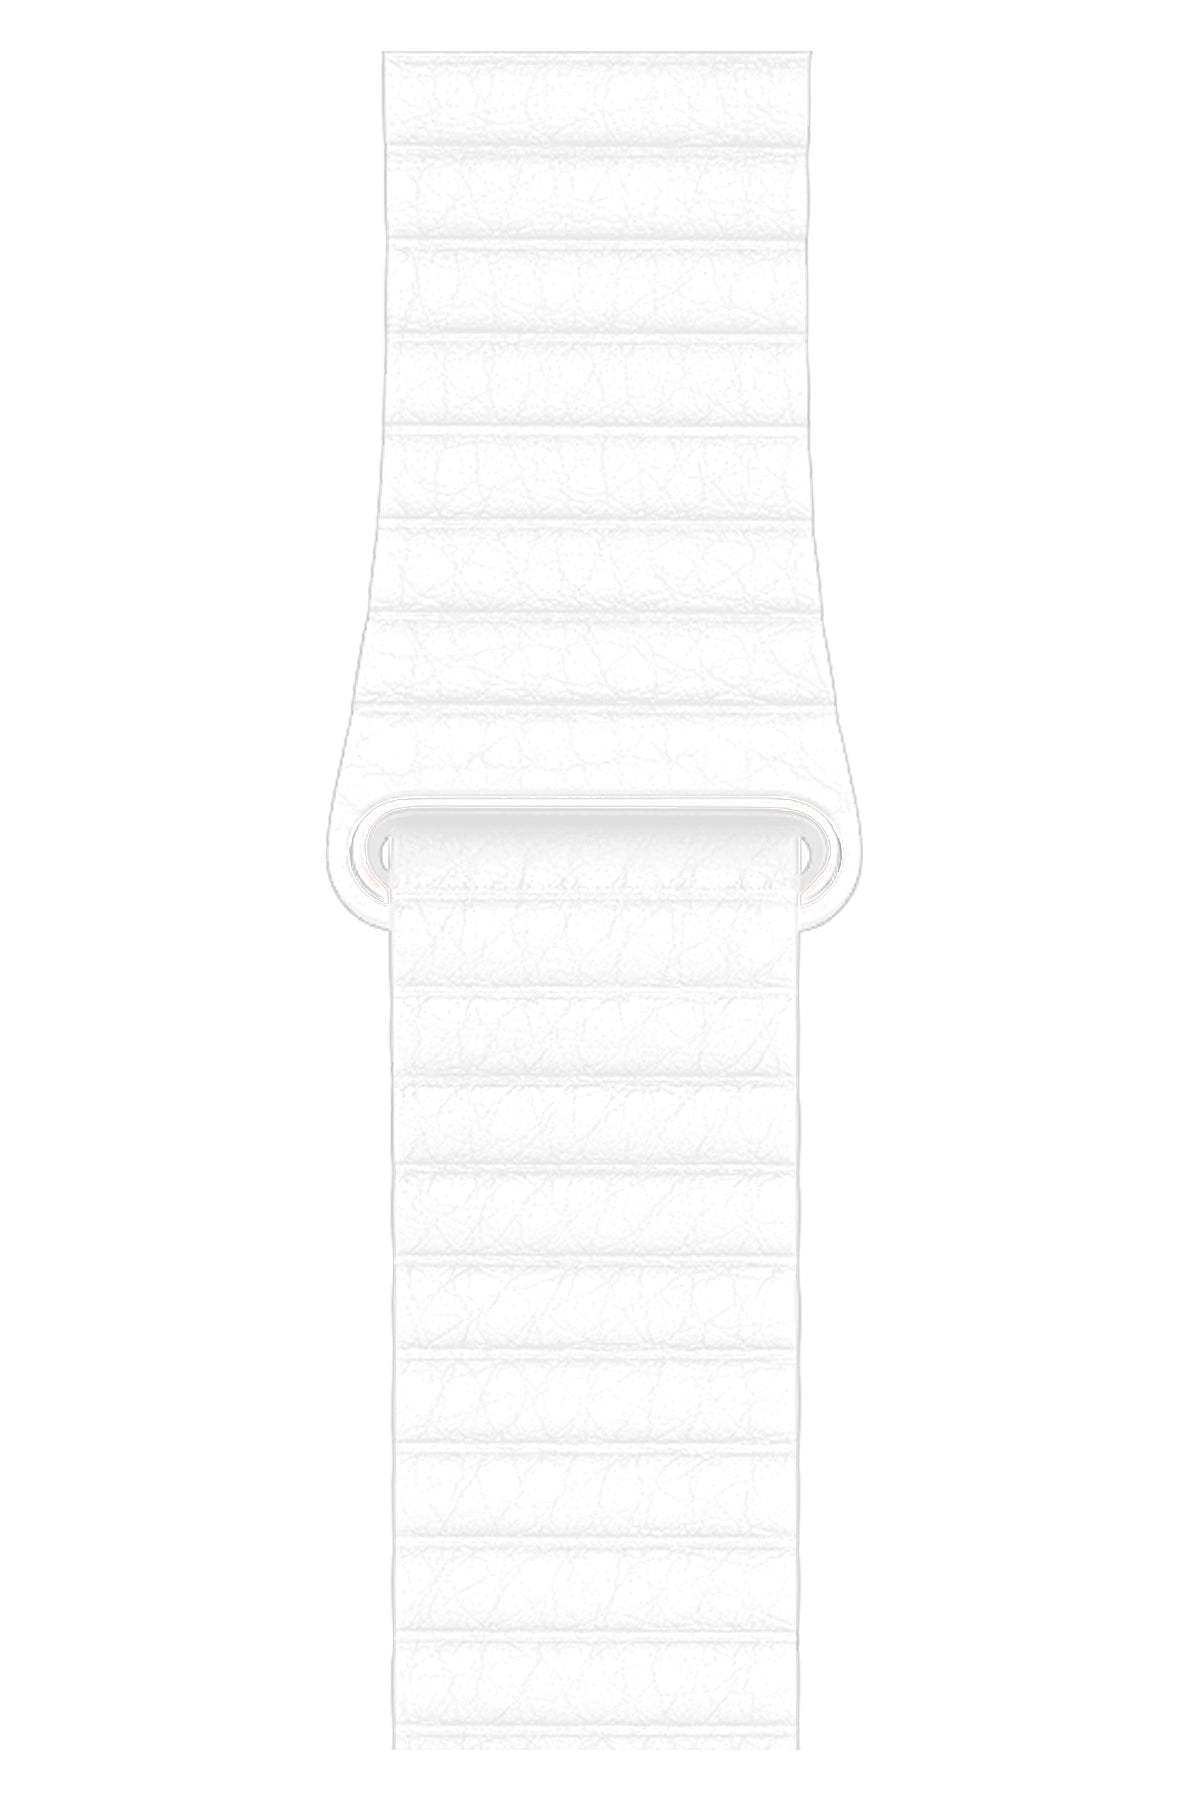 Apple Watch Compatible Leather Loop Band White 